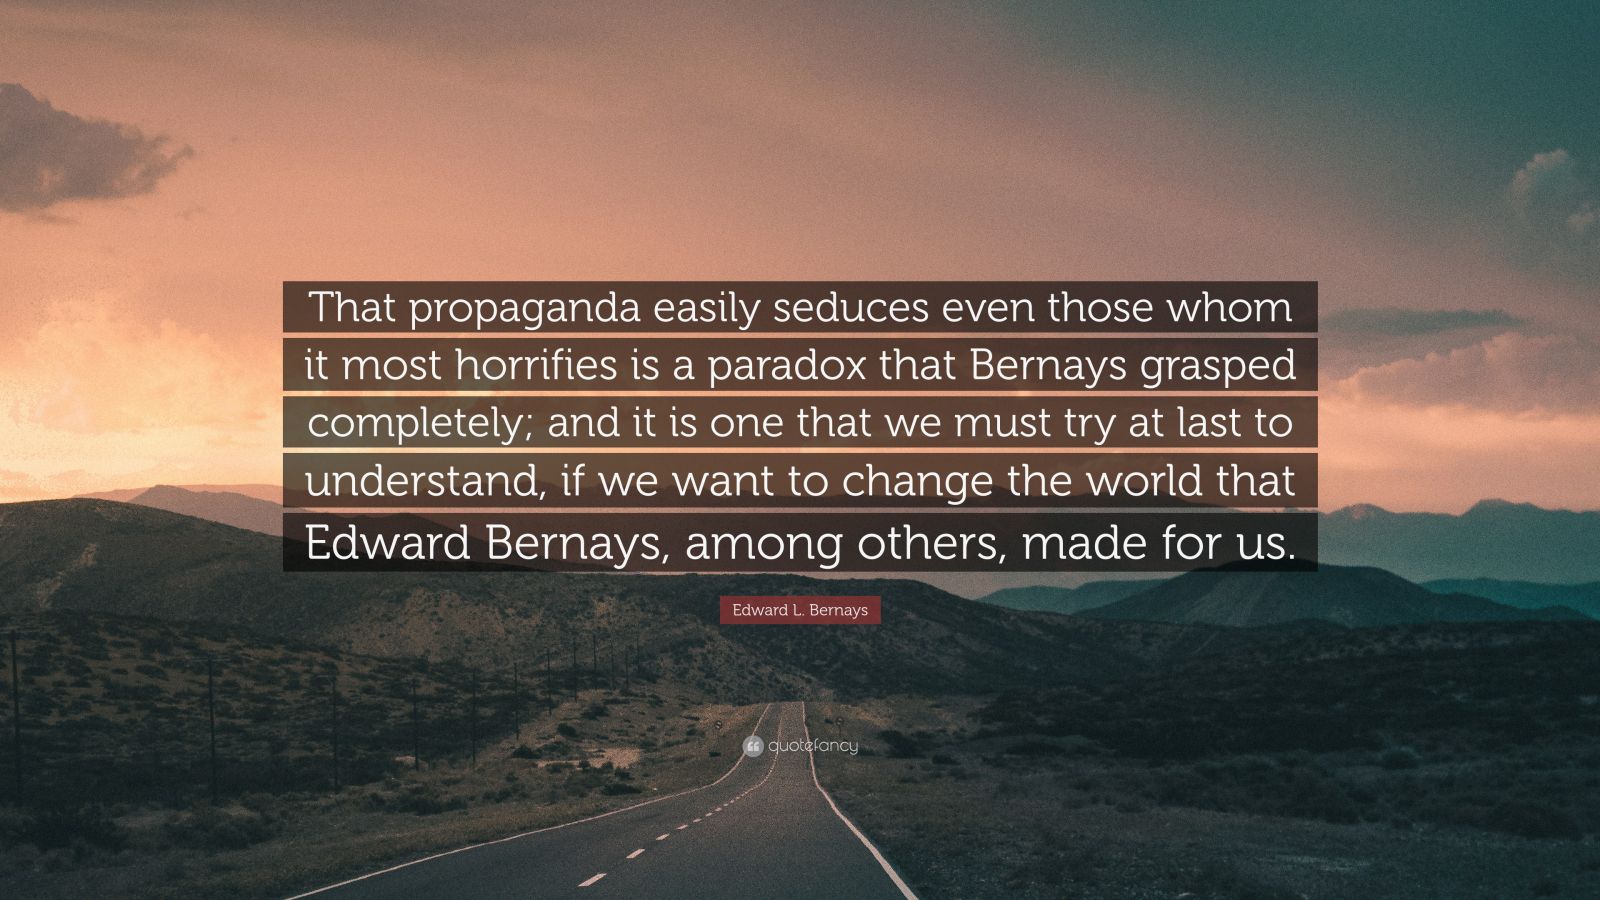 Top 50 Edward L Bernays Quotes 2021 Edition Free Images Quotefancy